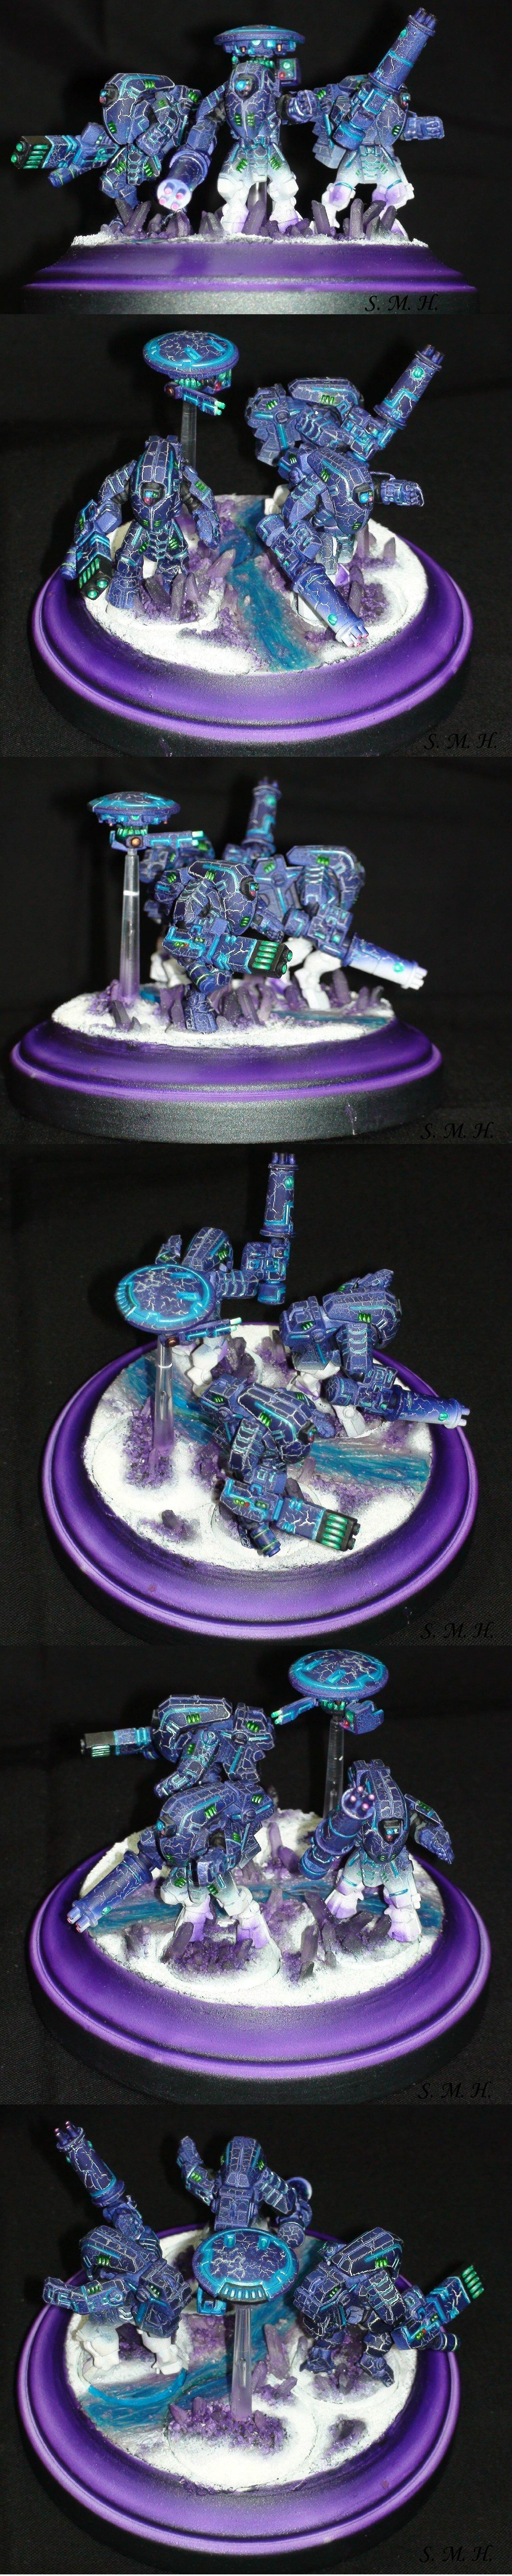 Airbrush, Object Source Lighting, Stealthsuits, Tau, Warhammer 40,000